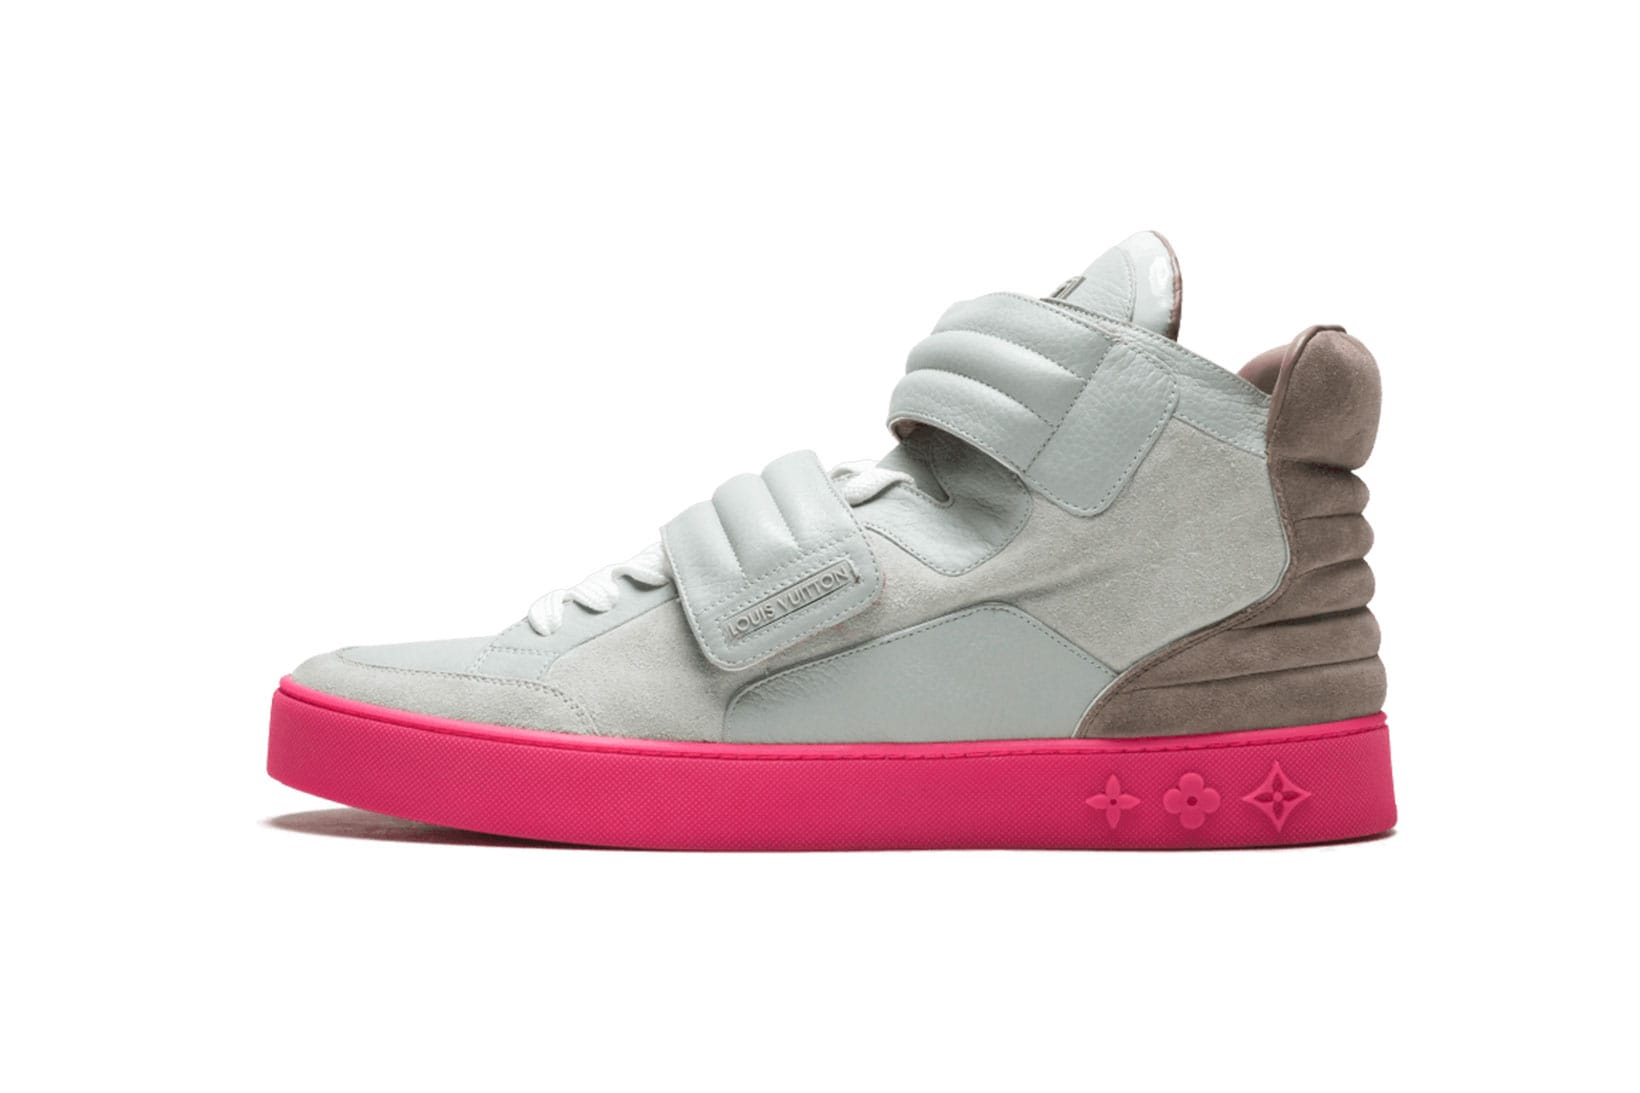 kanye west louis vuitton sneakers